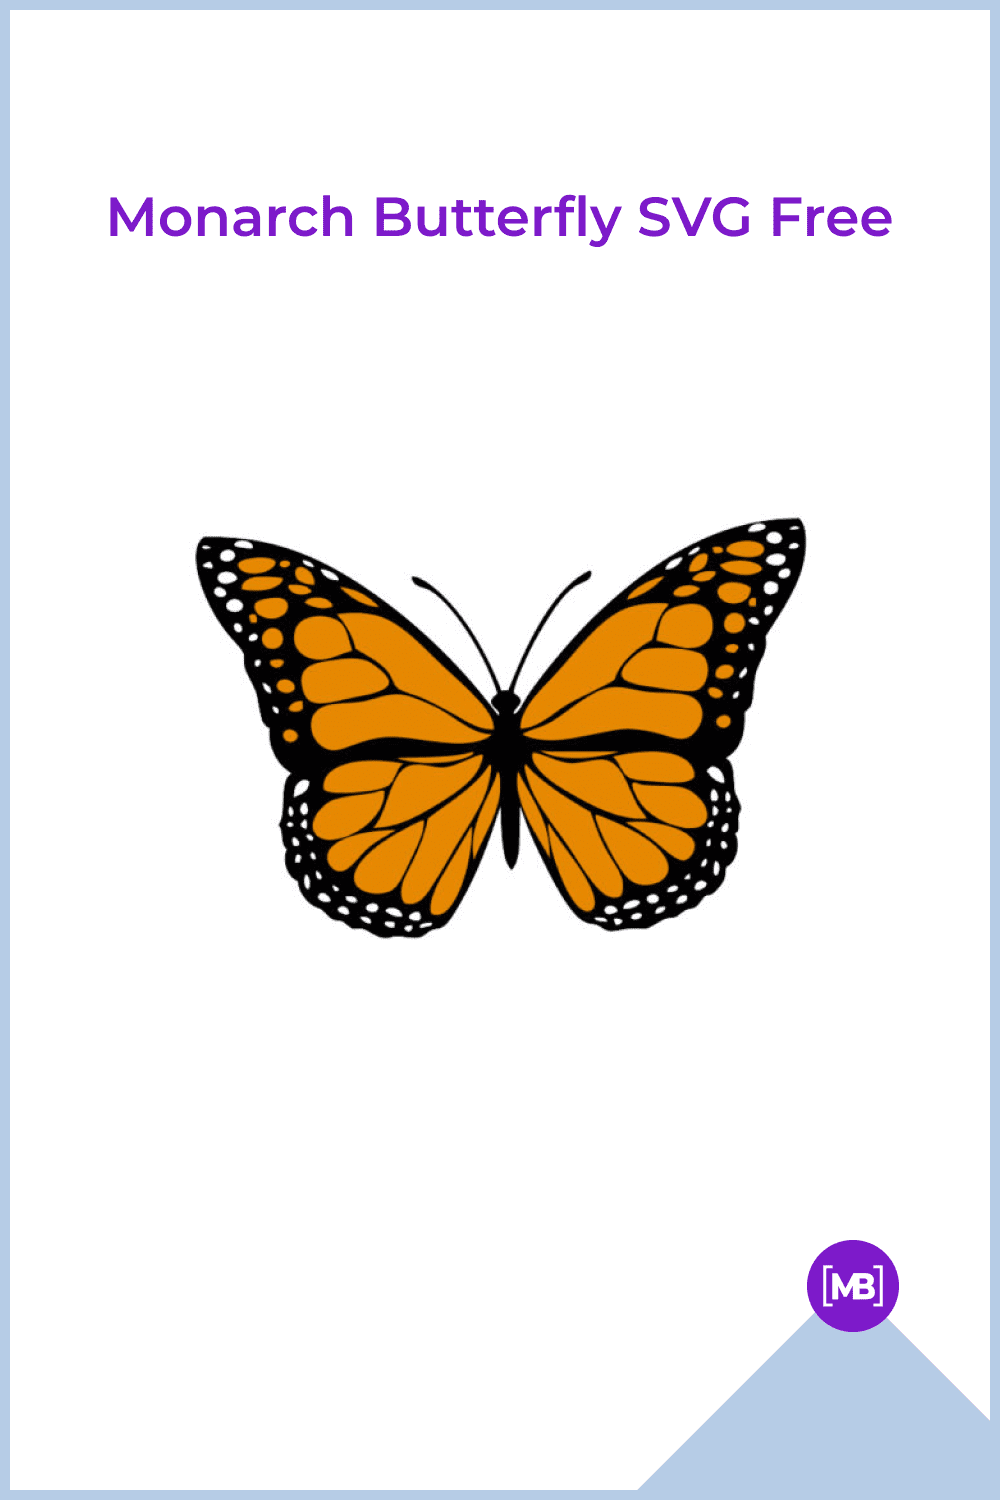 Monarch Butterfly SVG Free.